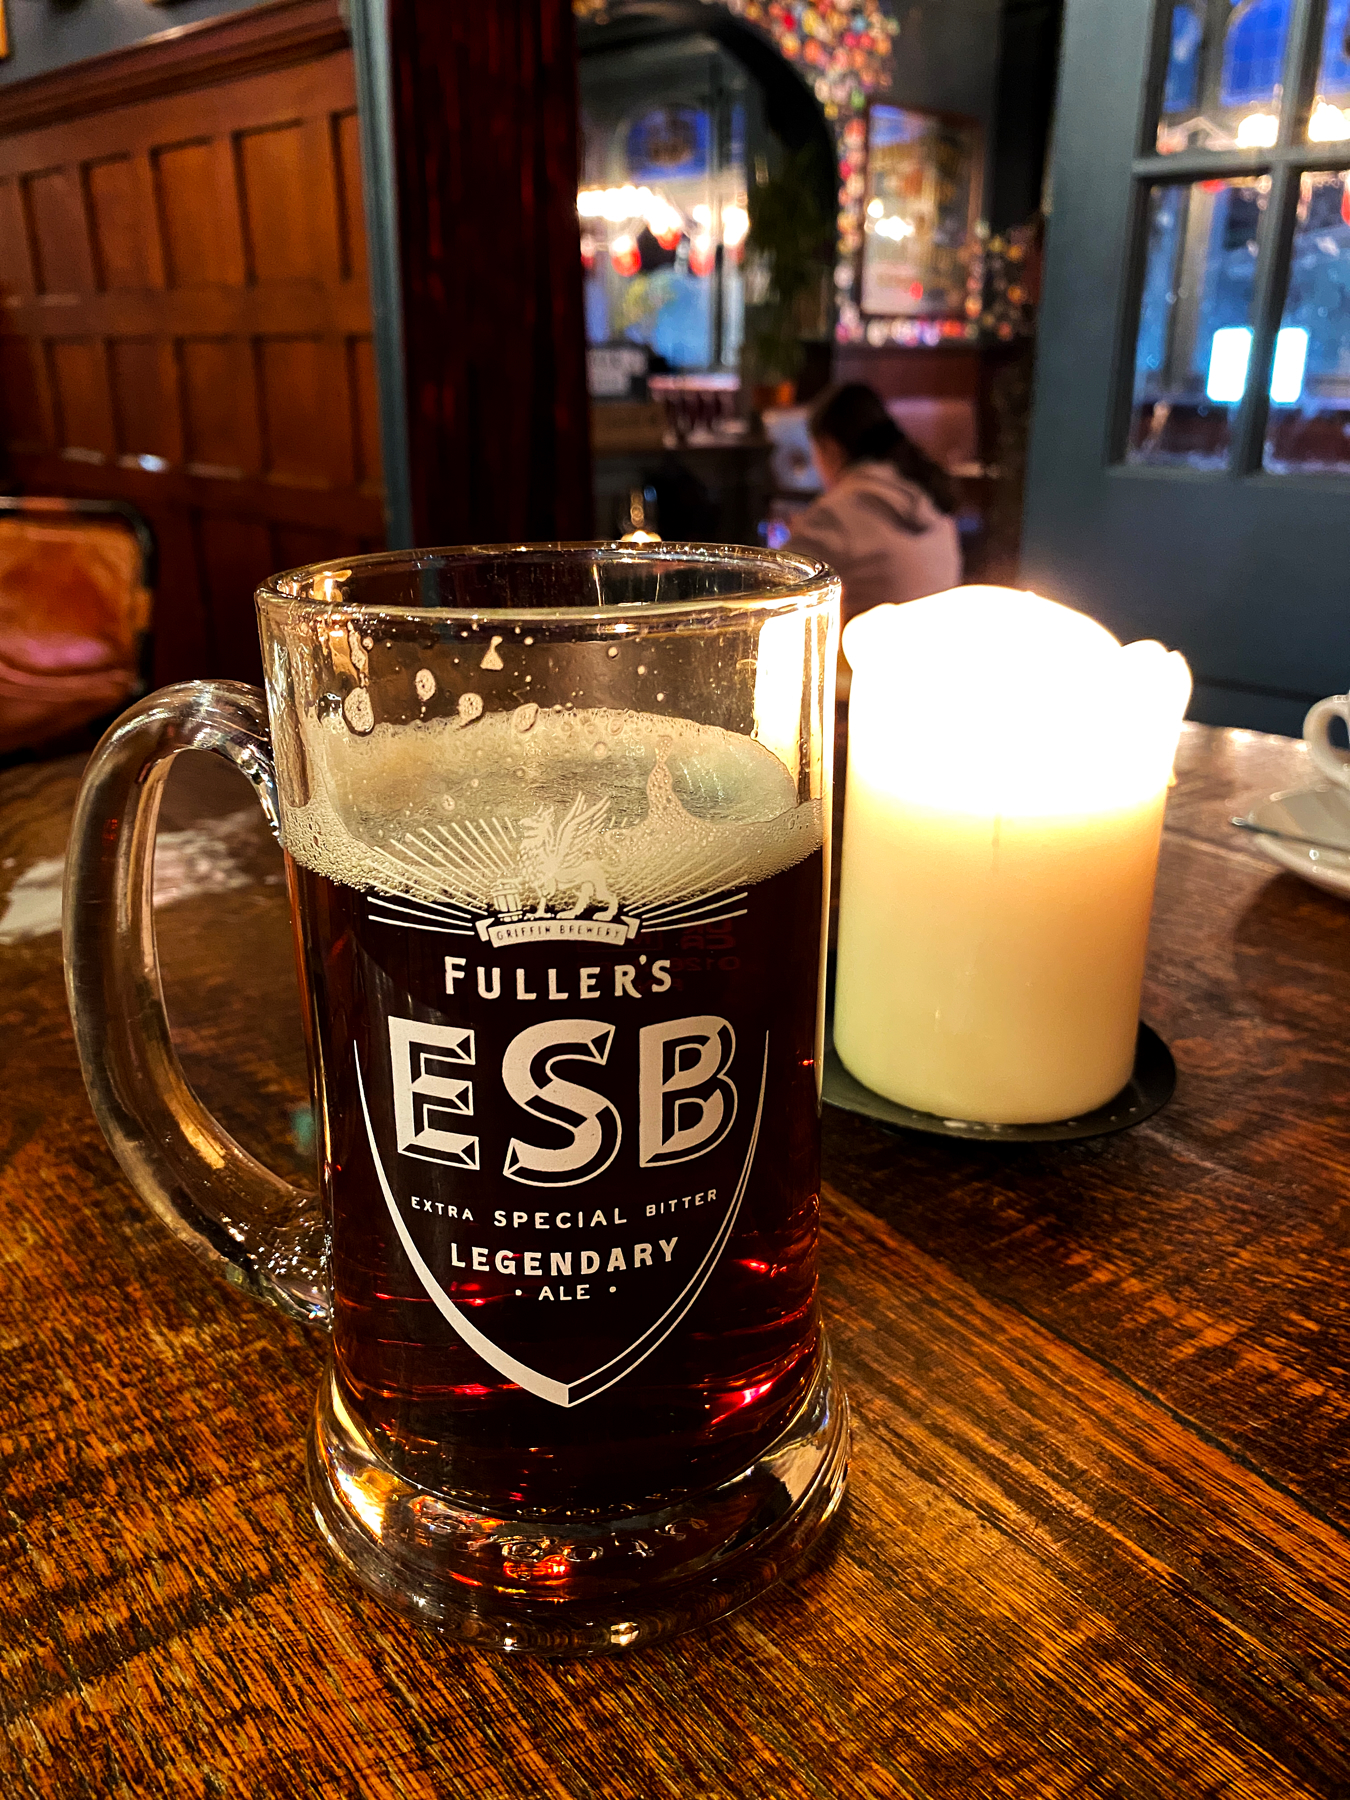  Candlelit pint of beer on a pub table